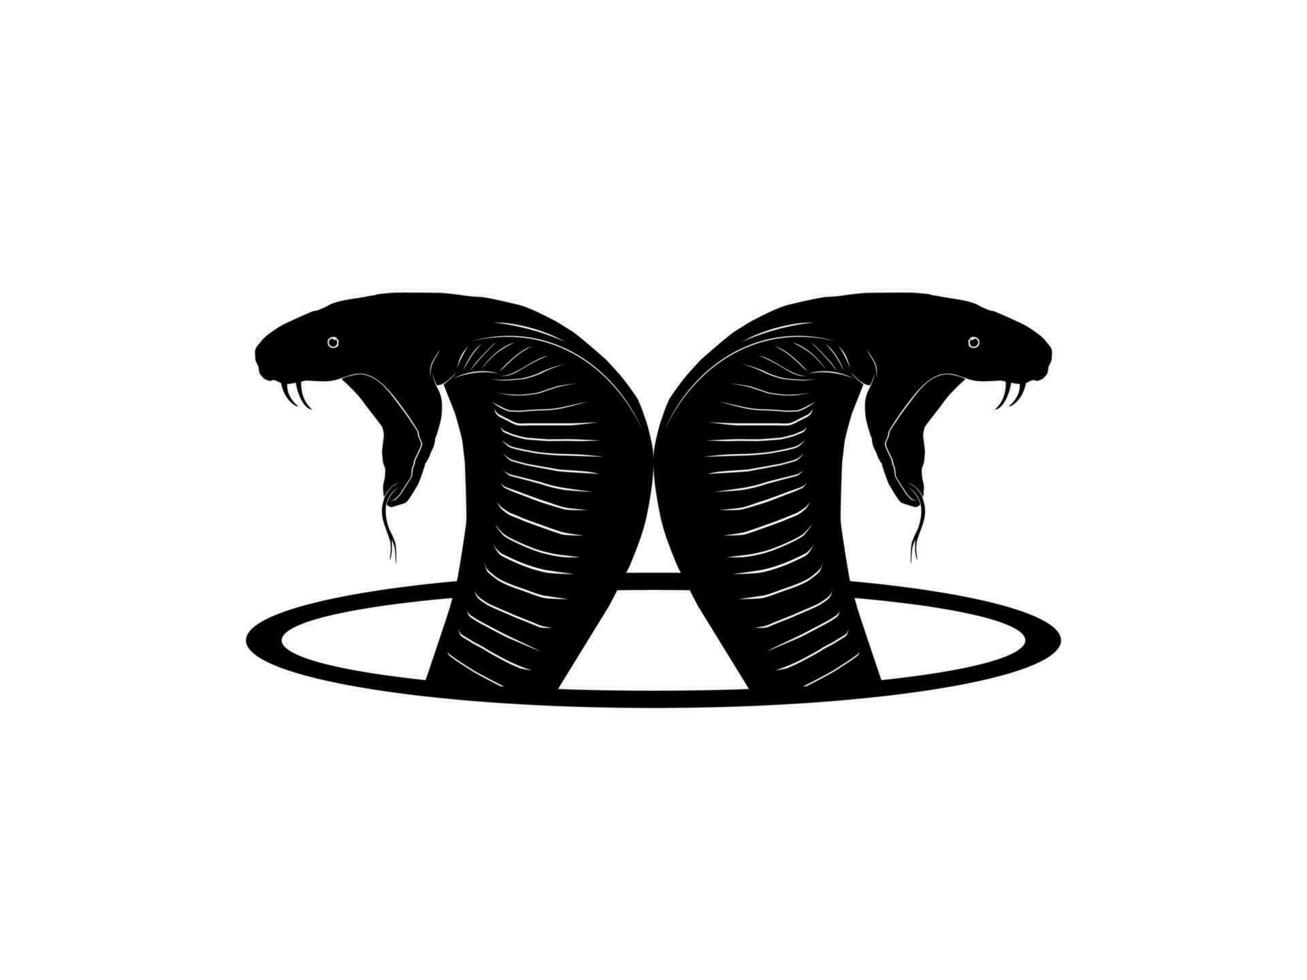 Silhouette of the Two King Cobra Head Arise from the Circle Hole for Logo Type. Vector Illustration